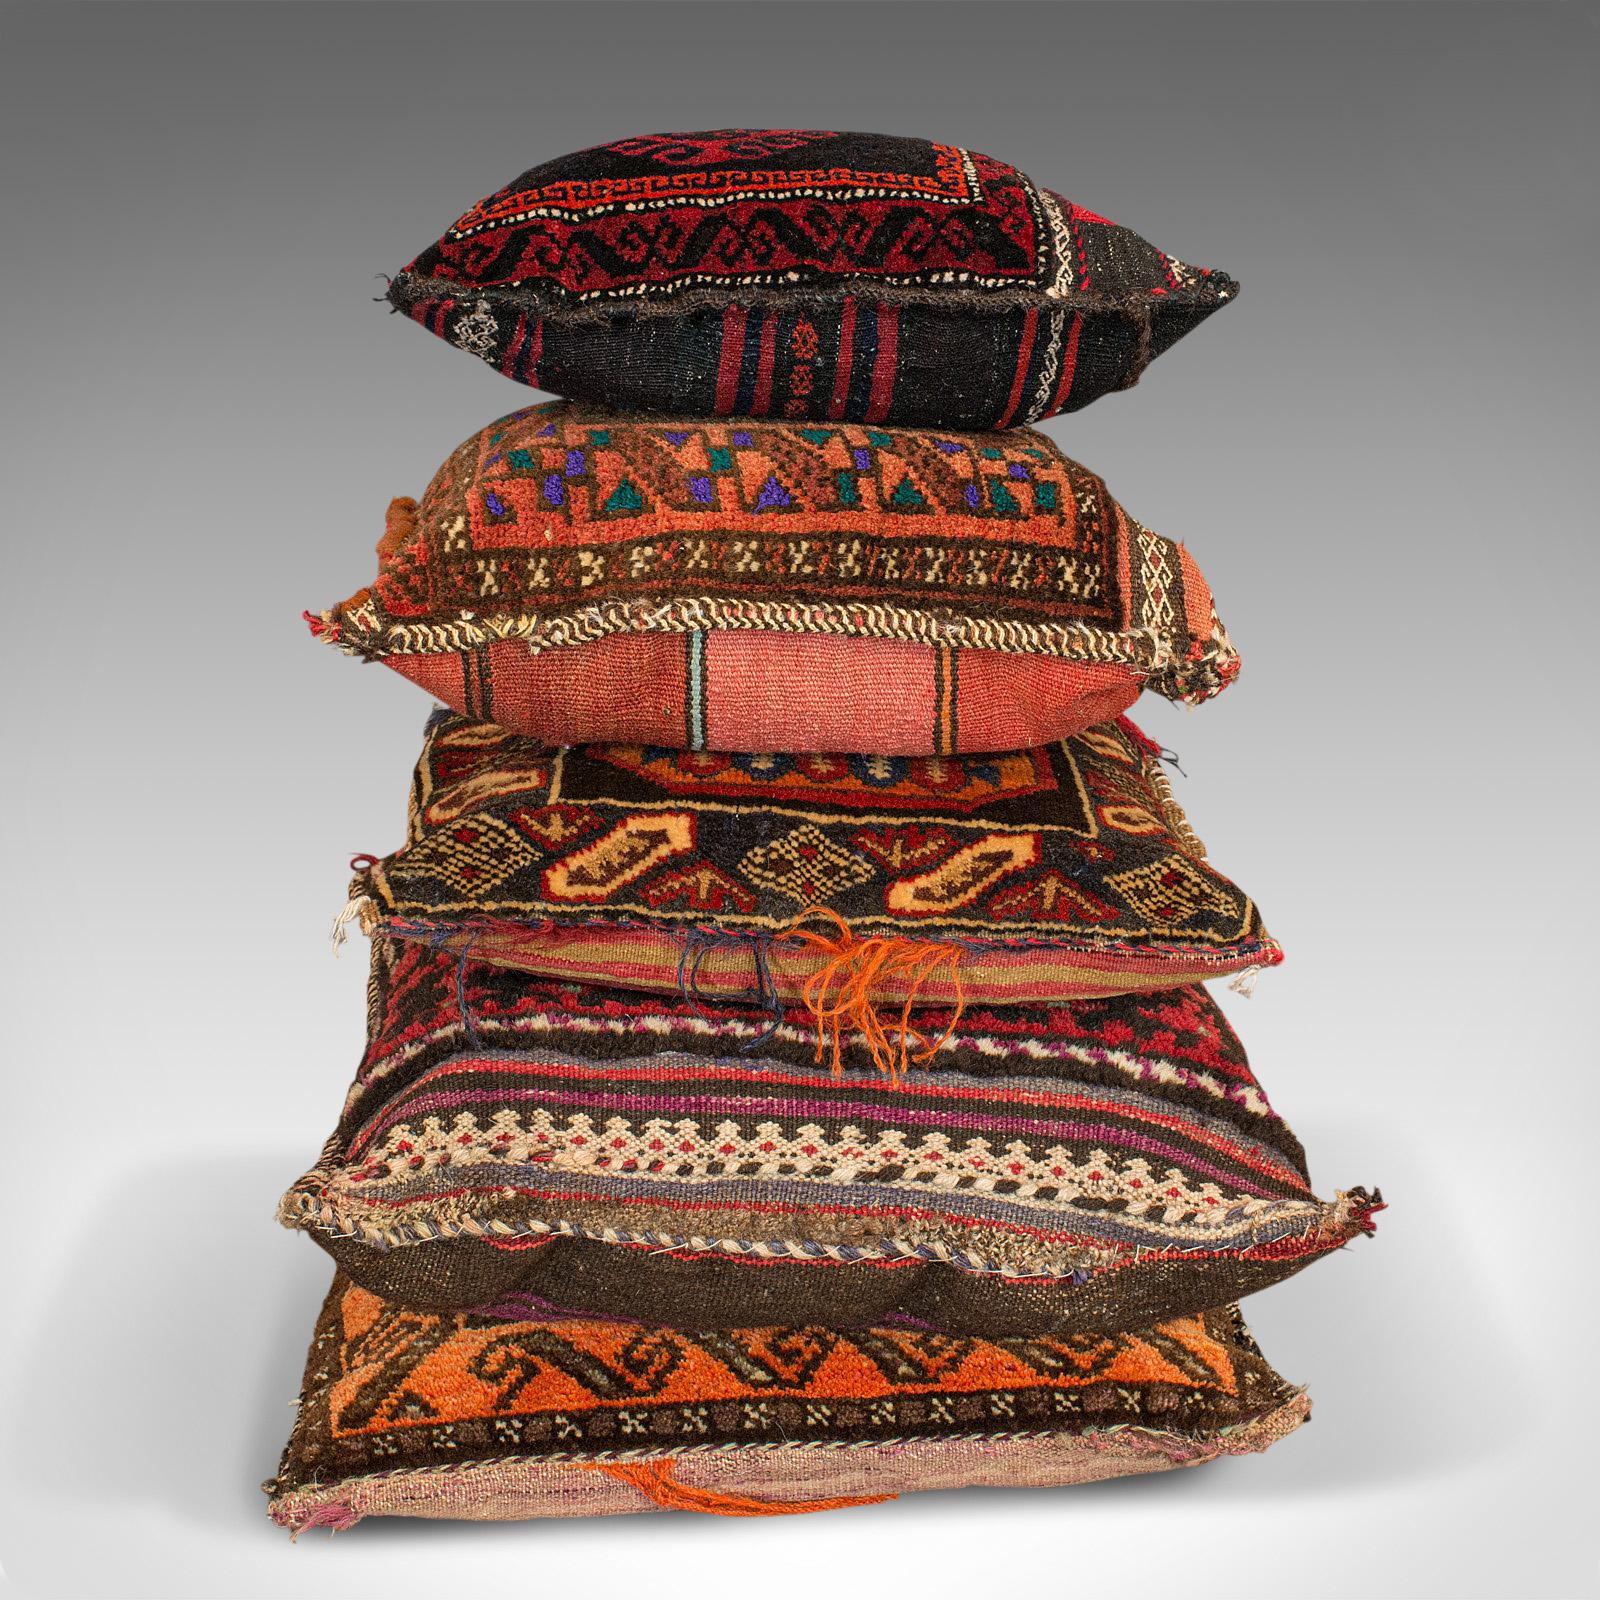 20th Century Set of 5, Vintage Kilim Cushions, North African, Camel Bag, Throw Pillows, 1950